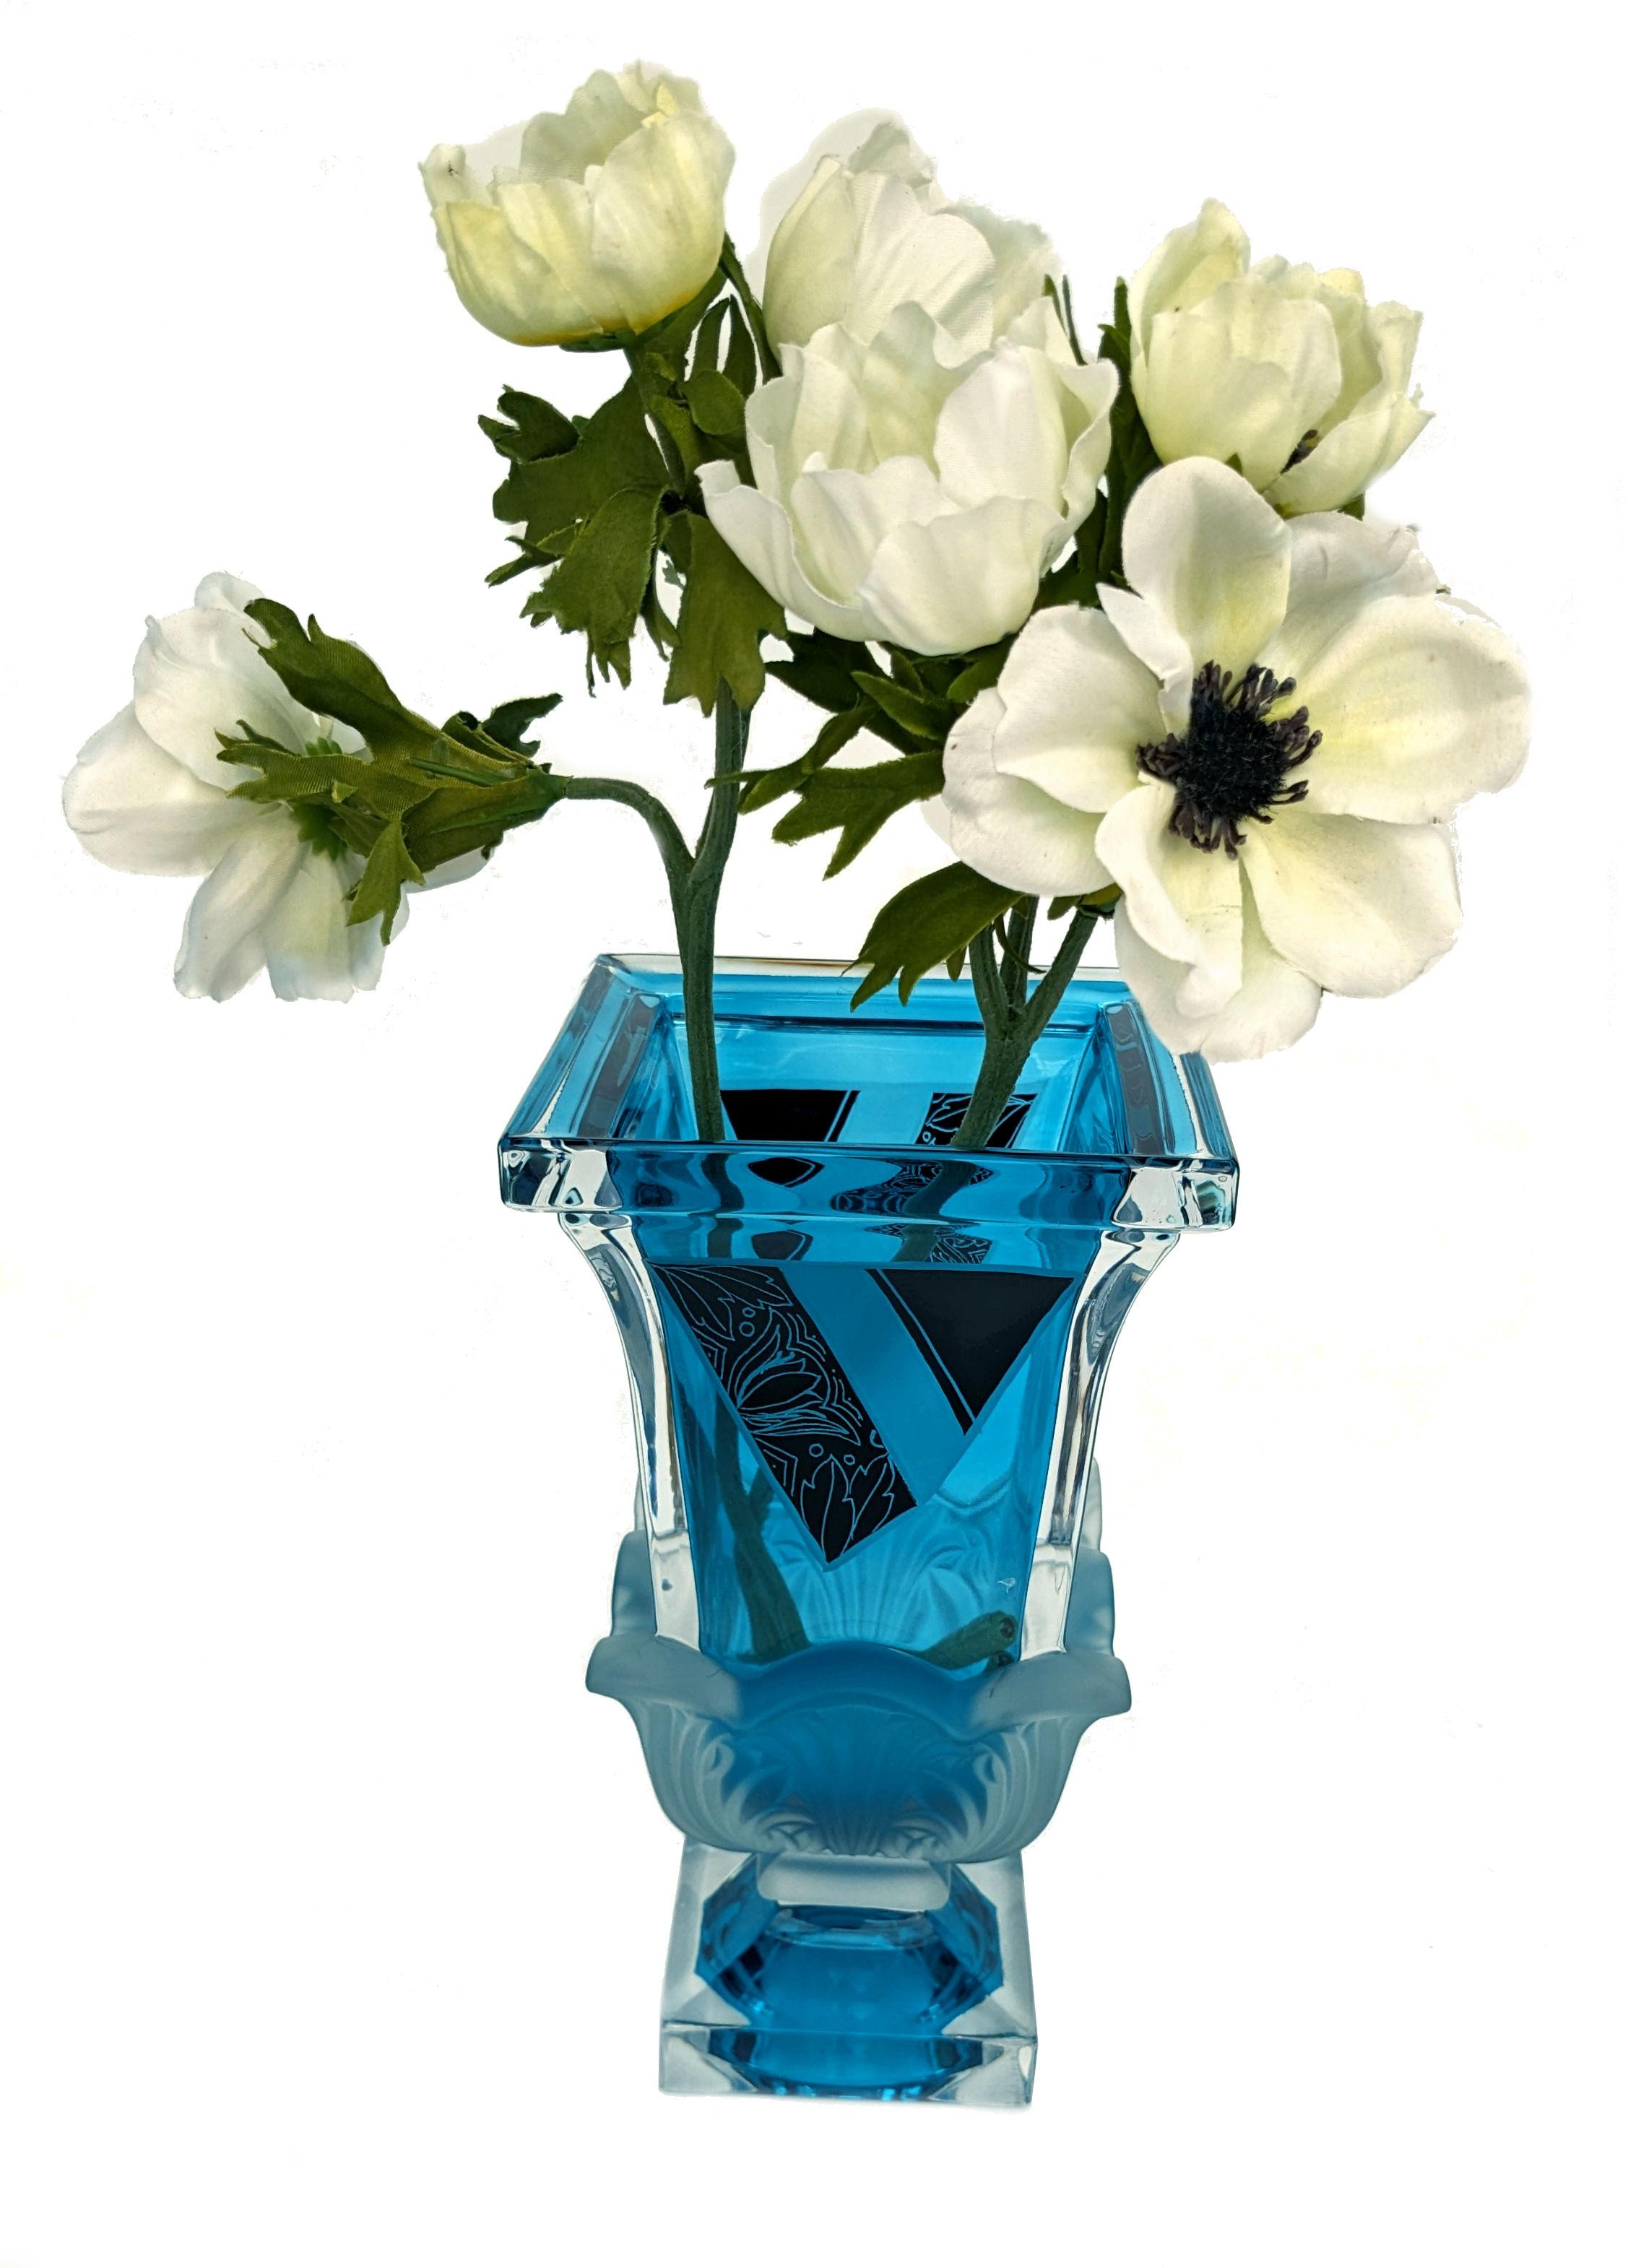 Standing just over 25 cm tall we offer for your consideration is this exceptional 1930's Art Deco glass vase, and what a gem it is! It's beautifully elegant and with the most glorious geometric decoration. Features clear and blue glass with jet